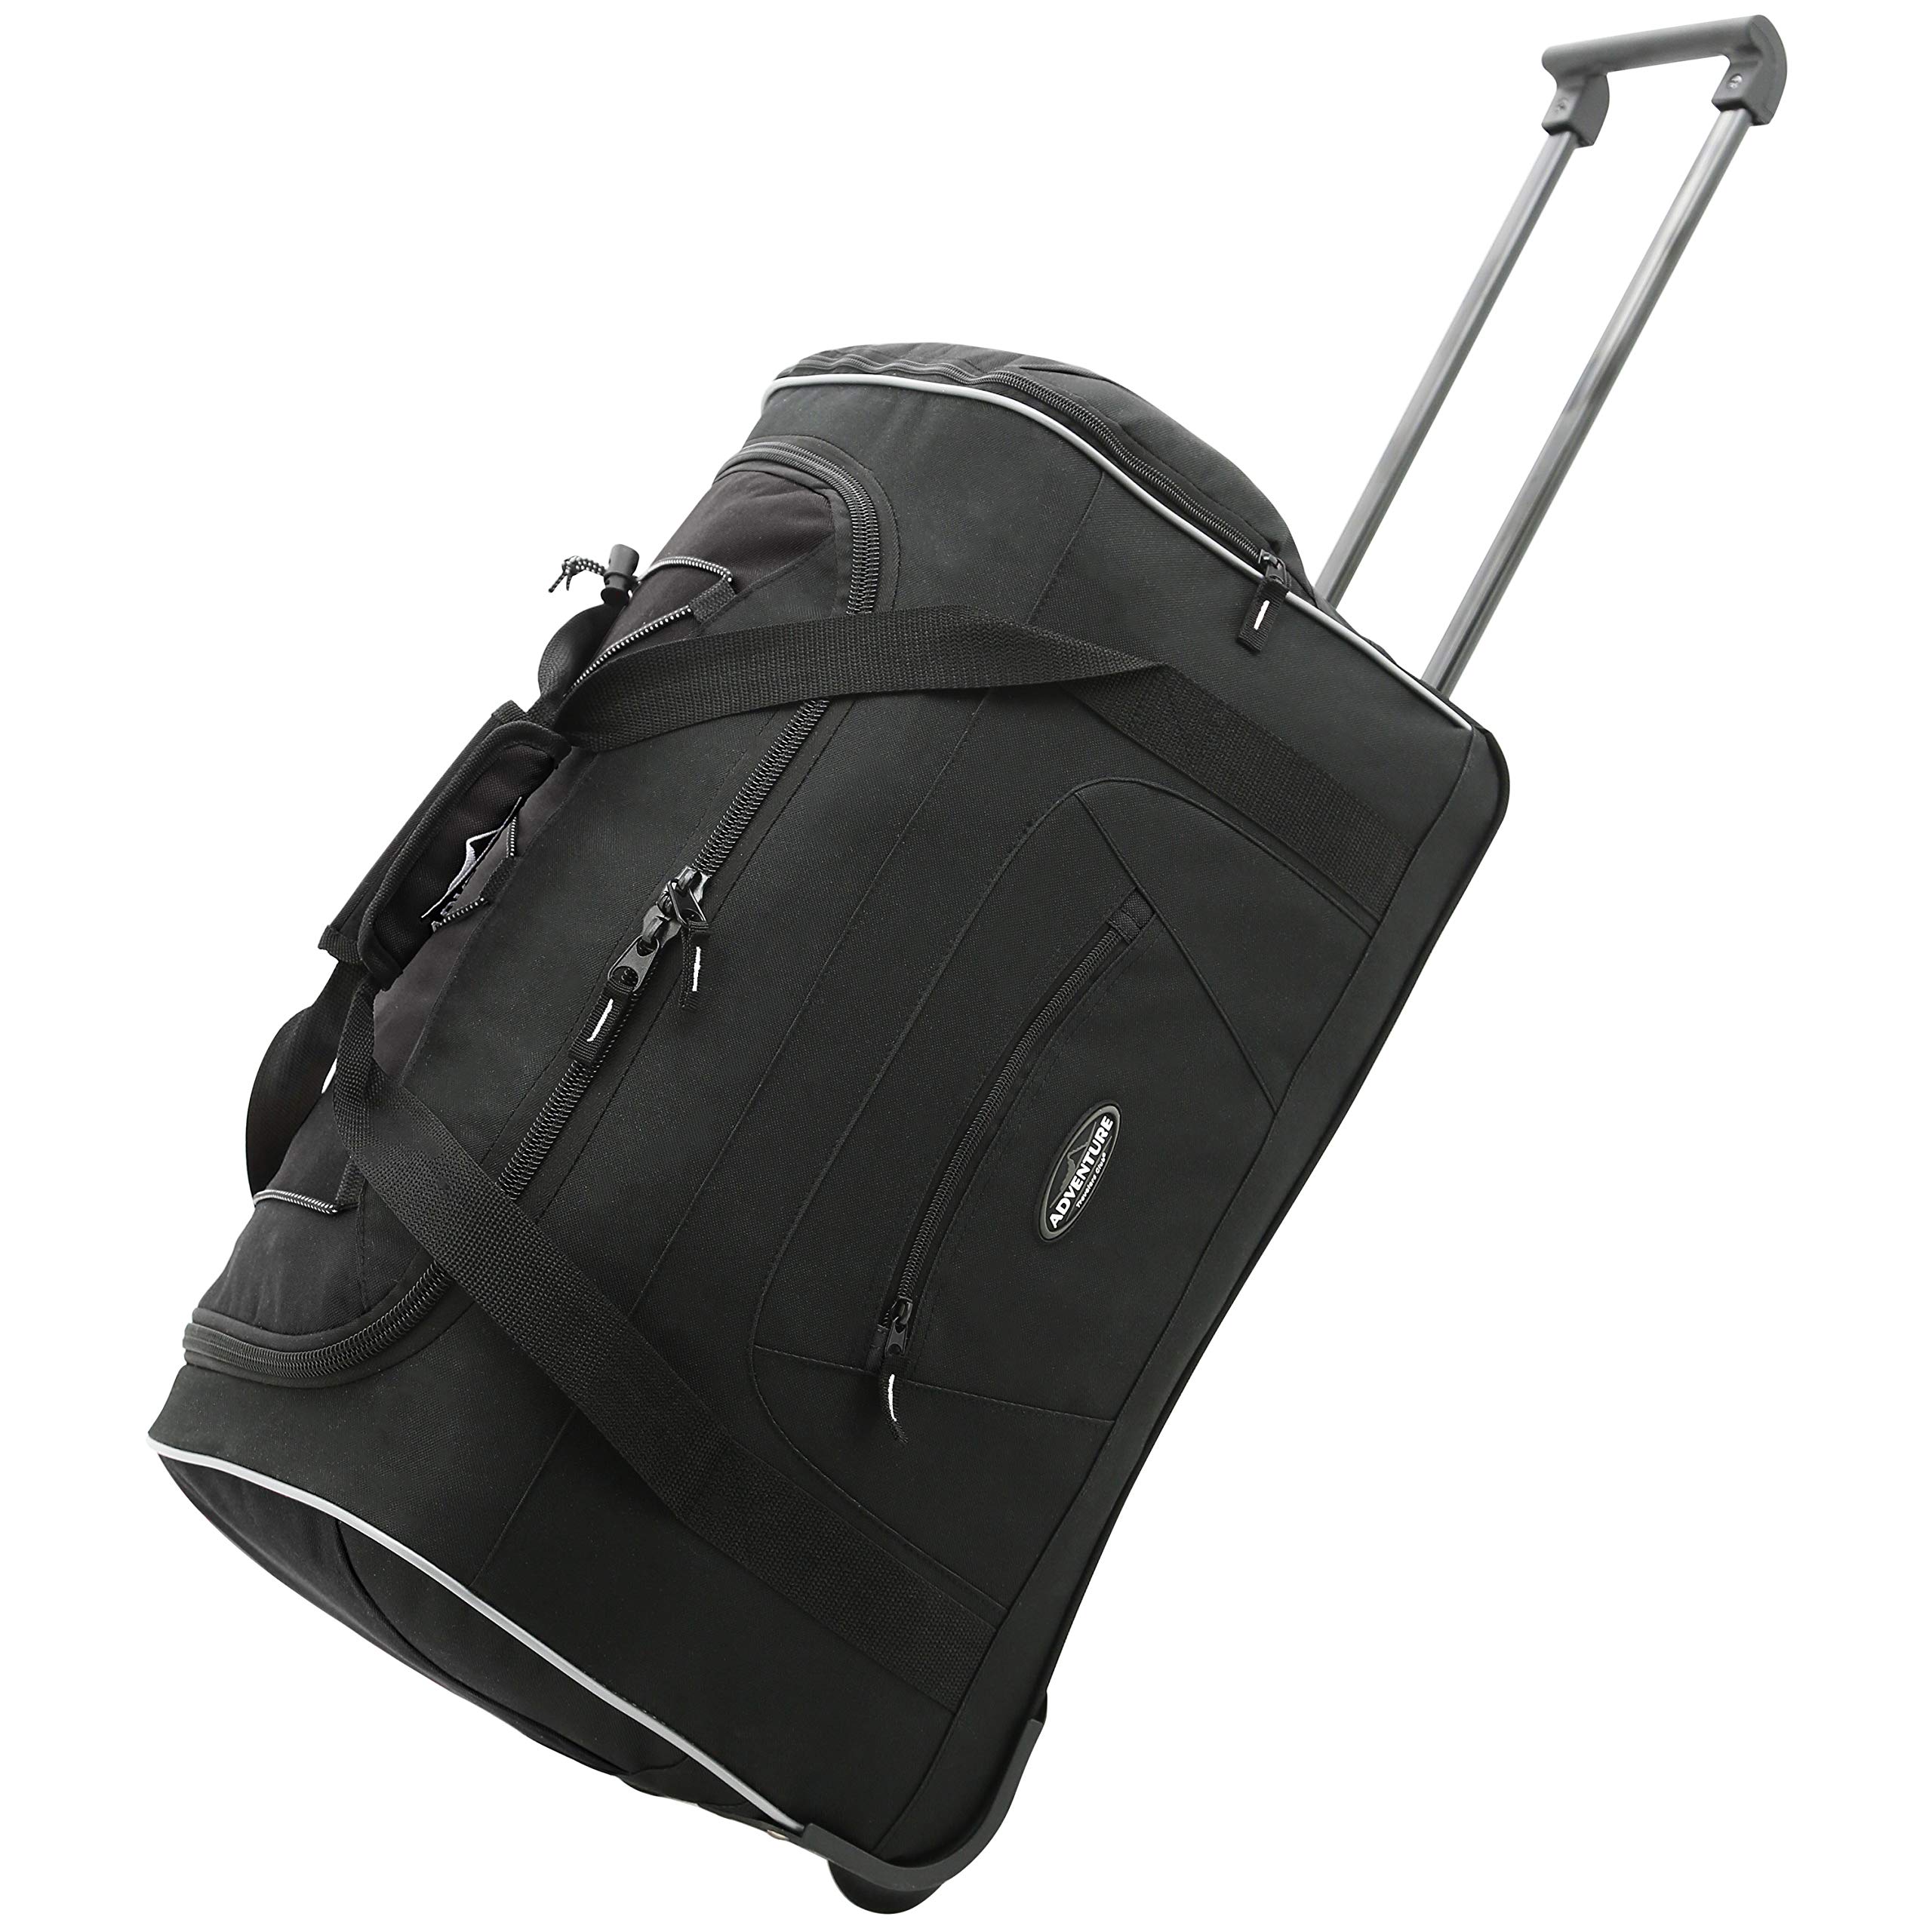 22" Travelers Club Adventure Upright Rolling Duffel Bag (Black) $24 + Free Shipping w/ Prime or on $25+